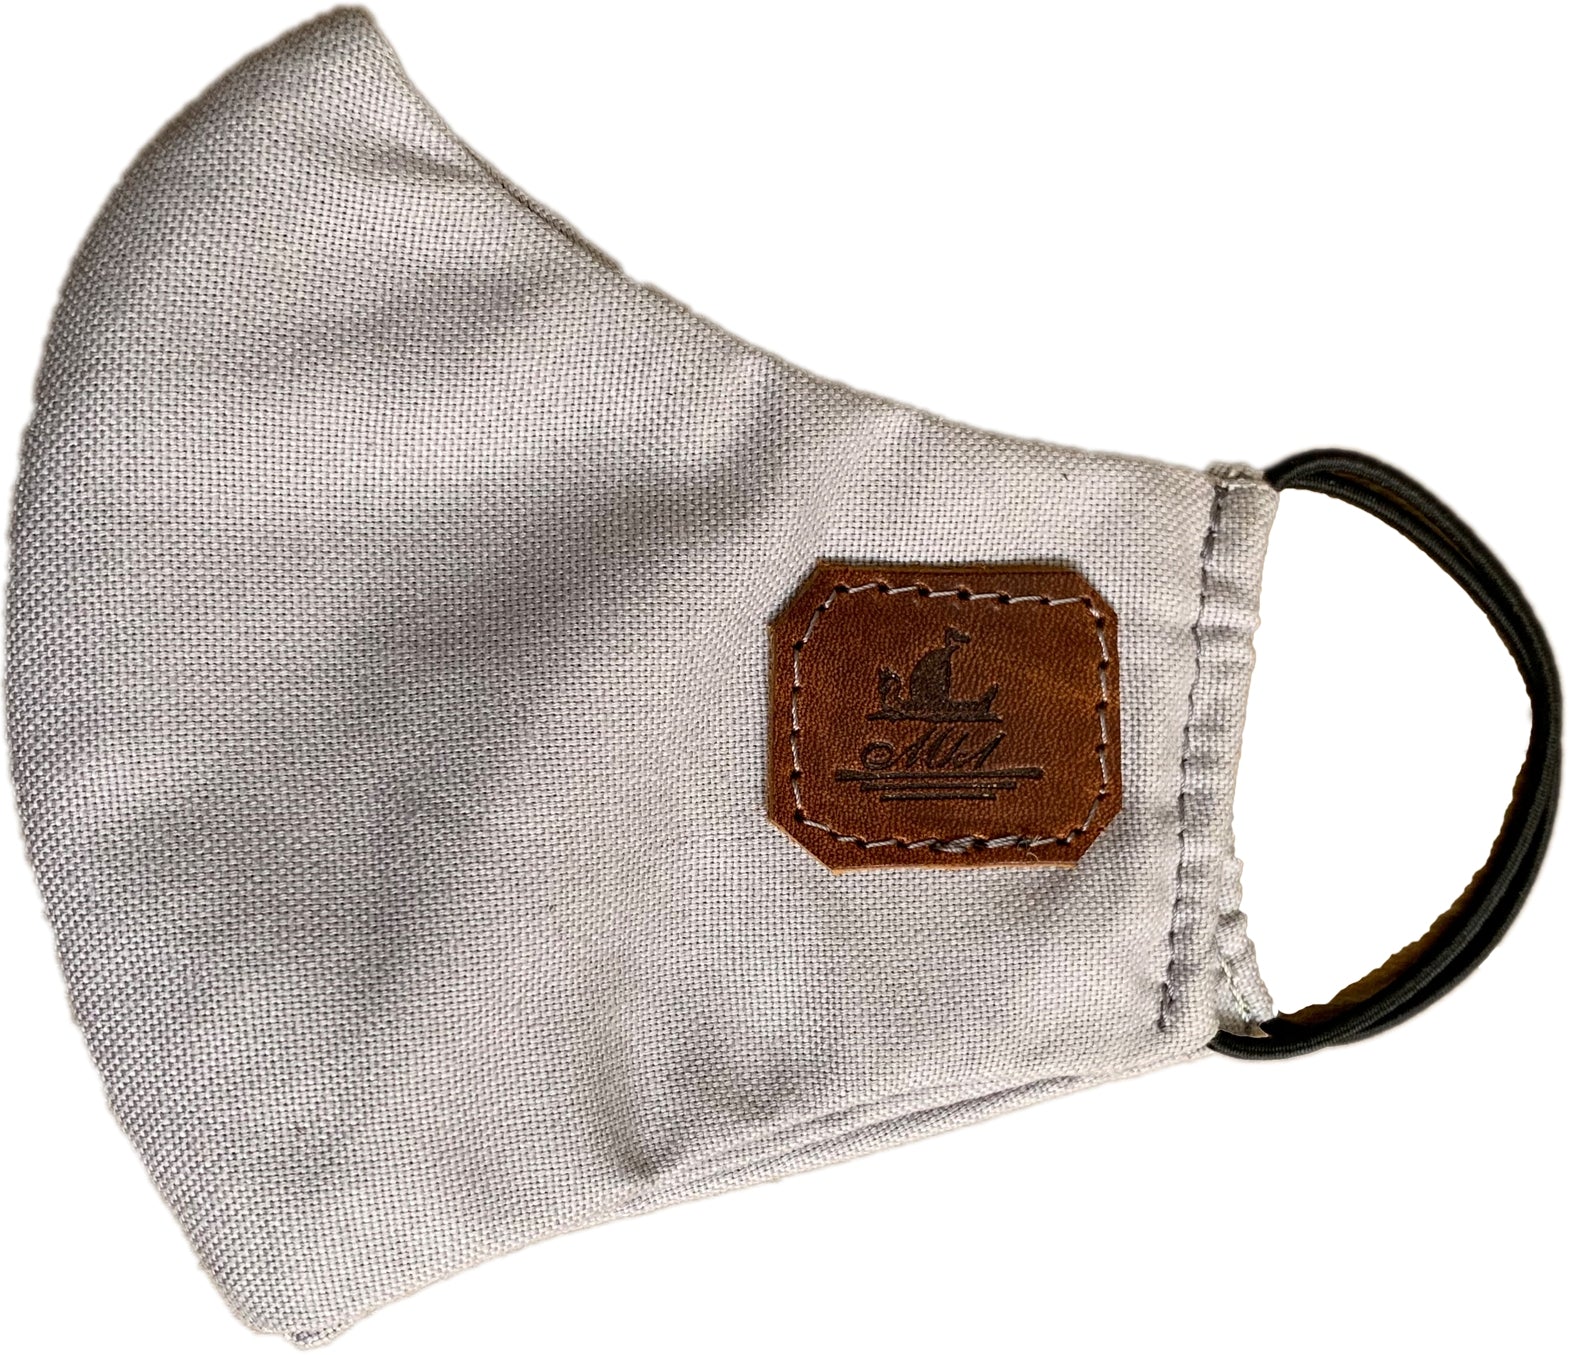 Mask from multi-purpose washable cotton with filter pocket and nose support Mk1/2-1beige color